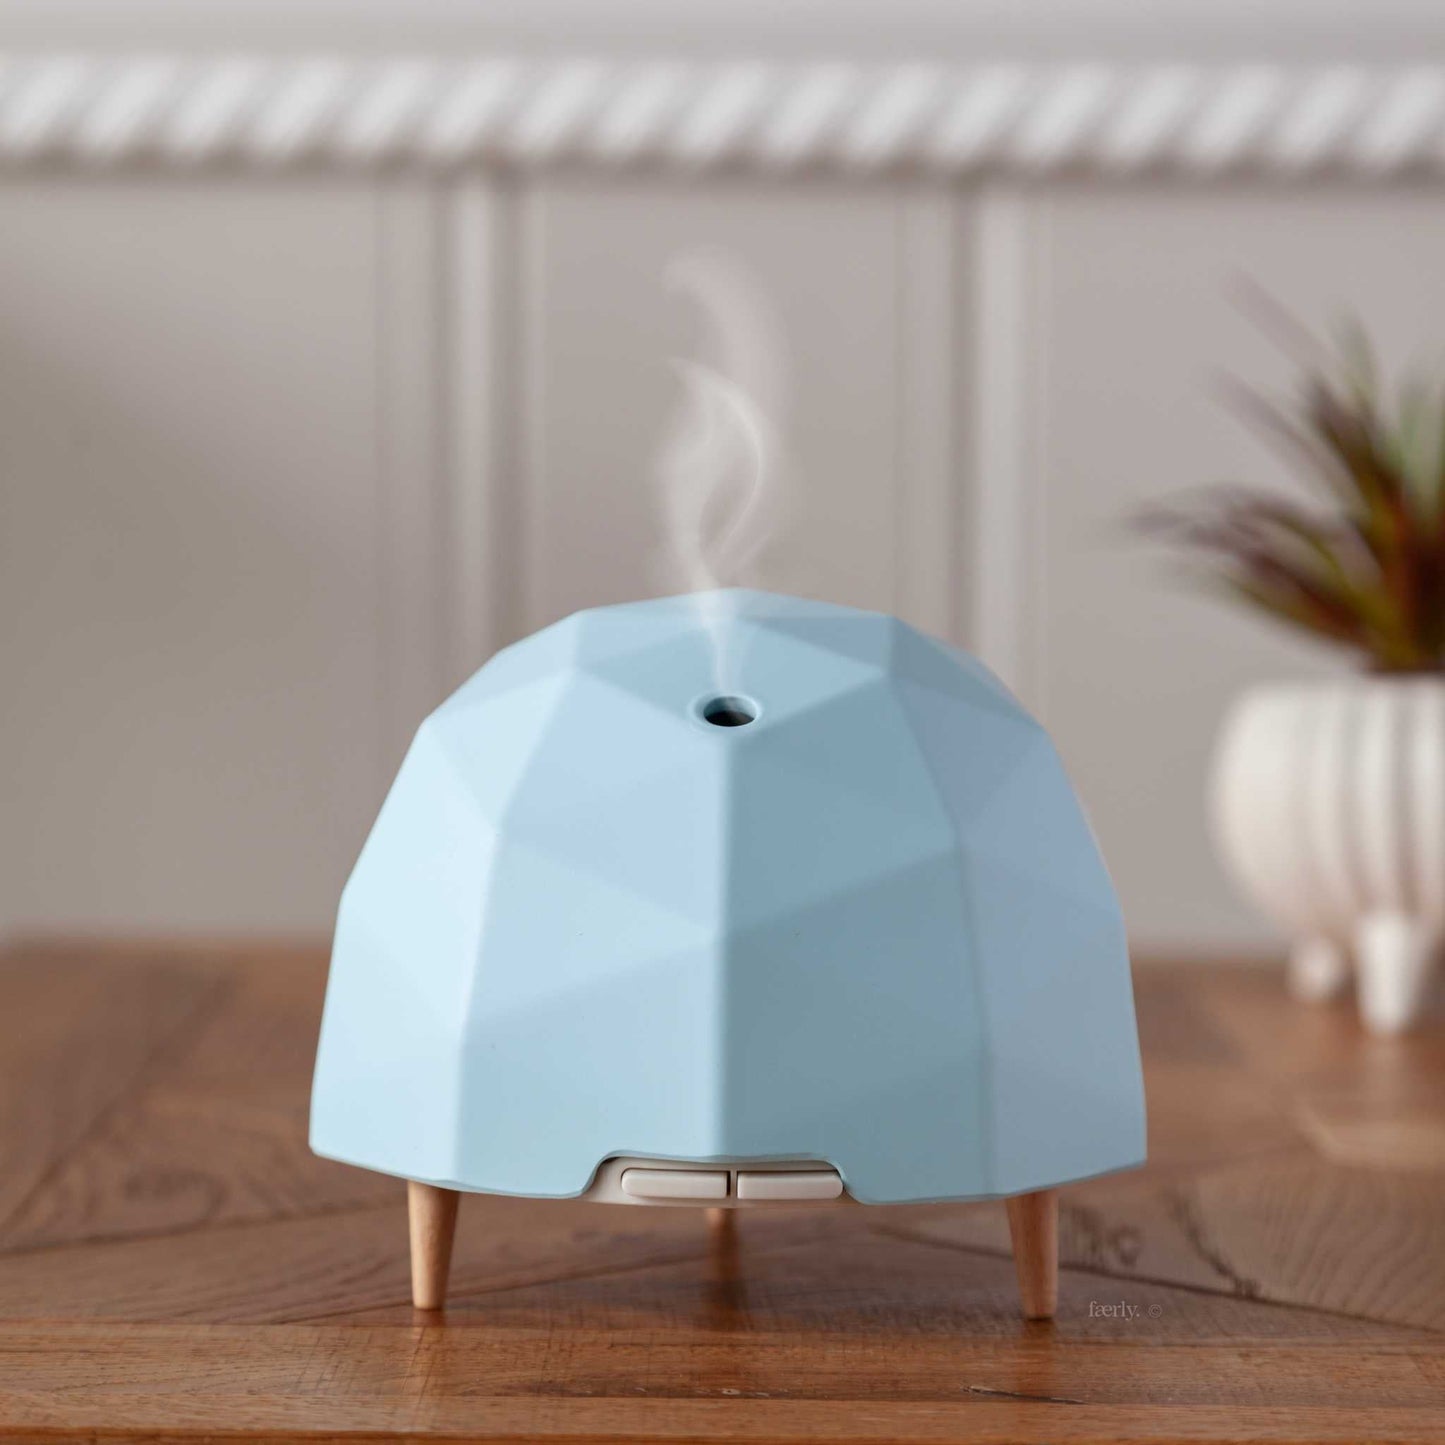 The Nature of Things Essential Oil Essential Oil Diffuser - Solenn - Ice Blue - The Nature of Things